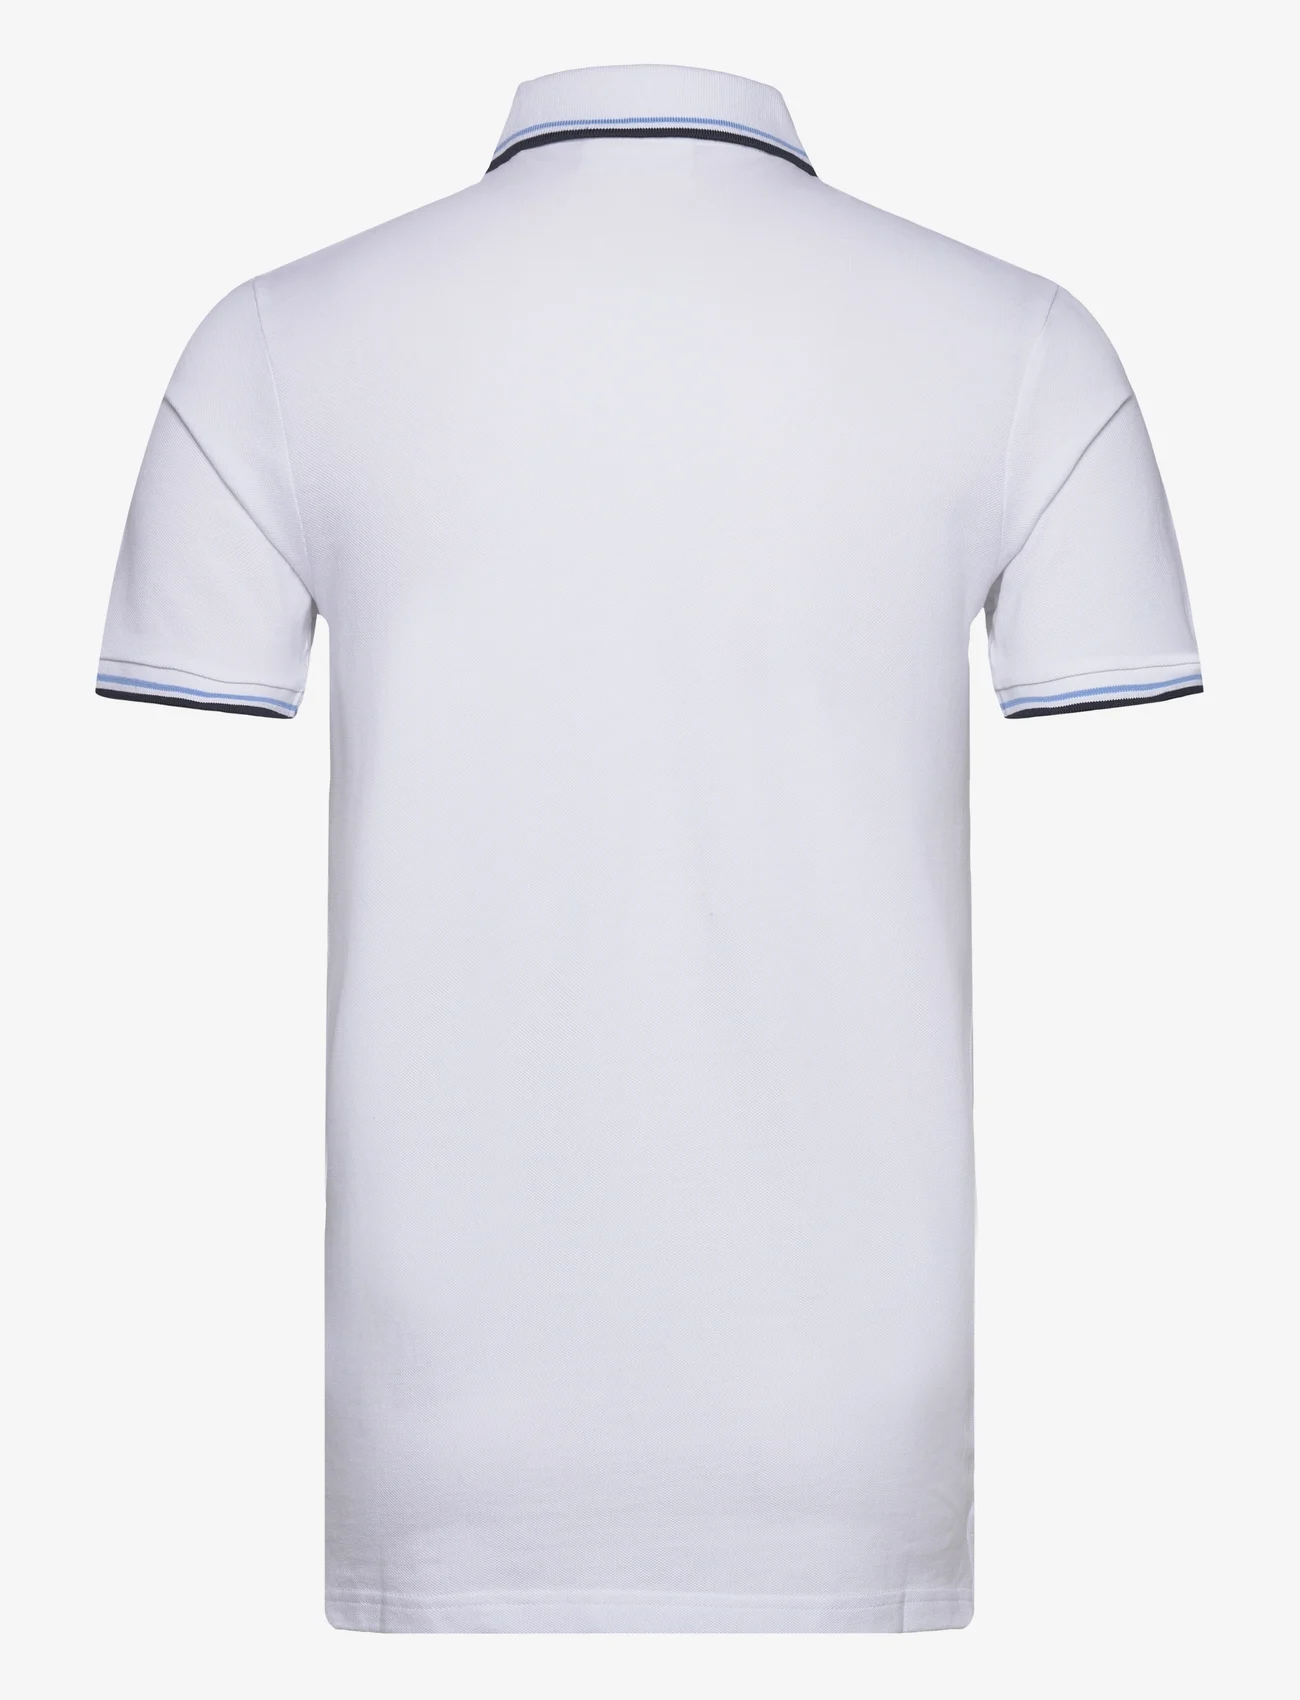 Lindbergh - Polo shirt with contrast piping - die niedrigsten preise - white 124 - 1